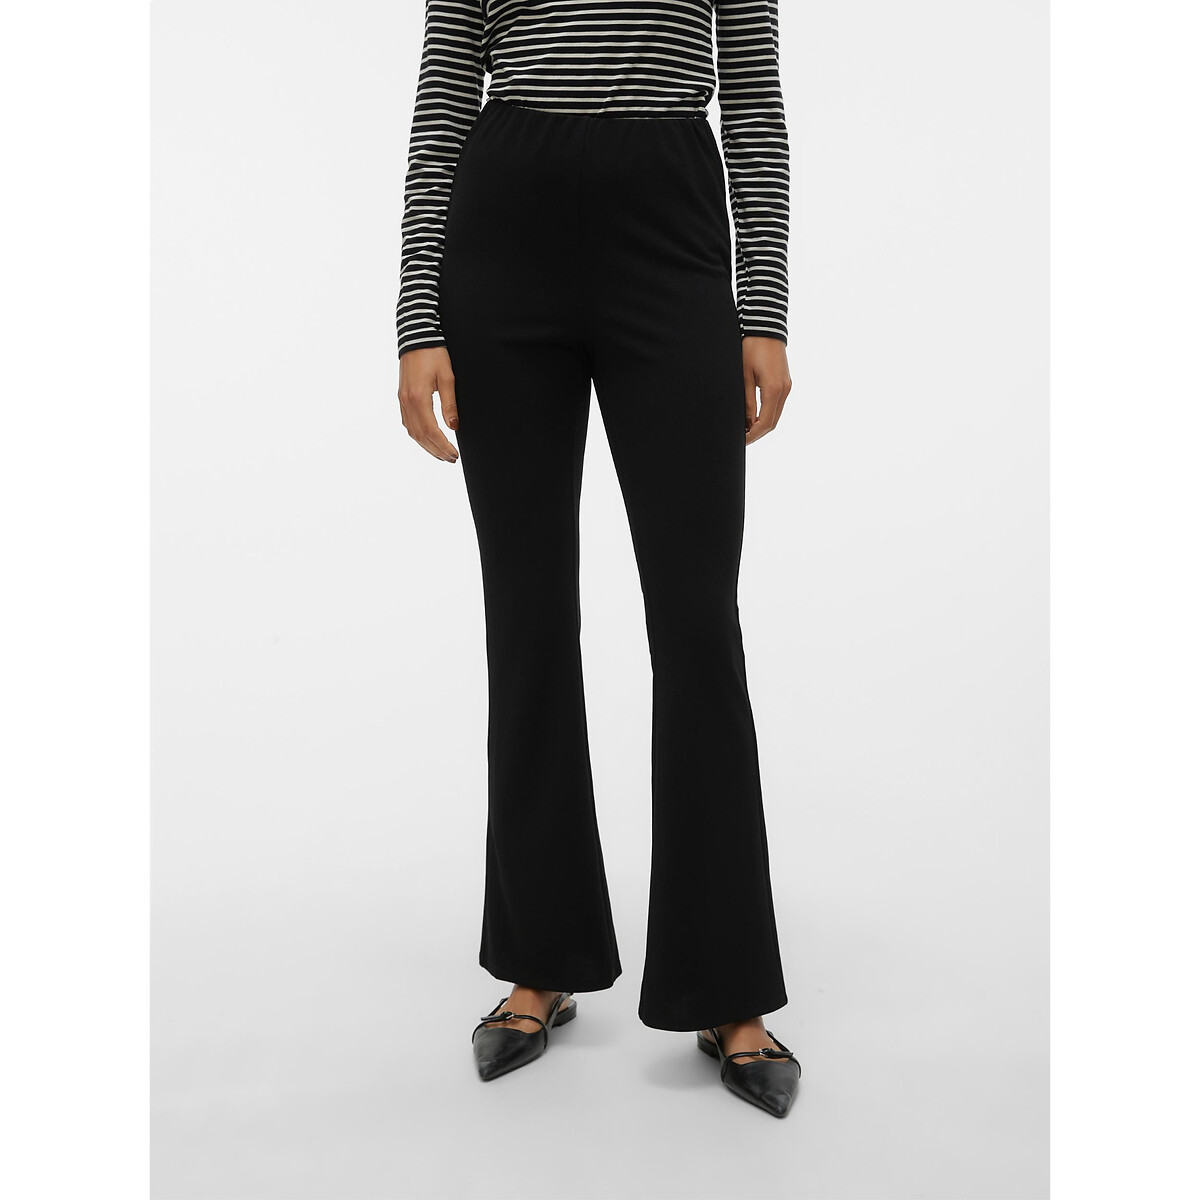 Image of High Waist Flared Trousers